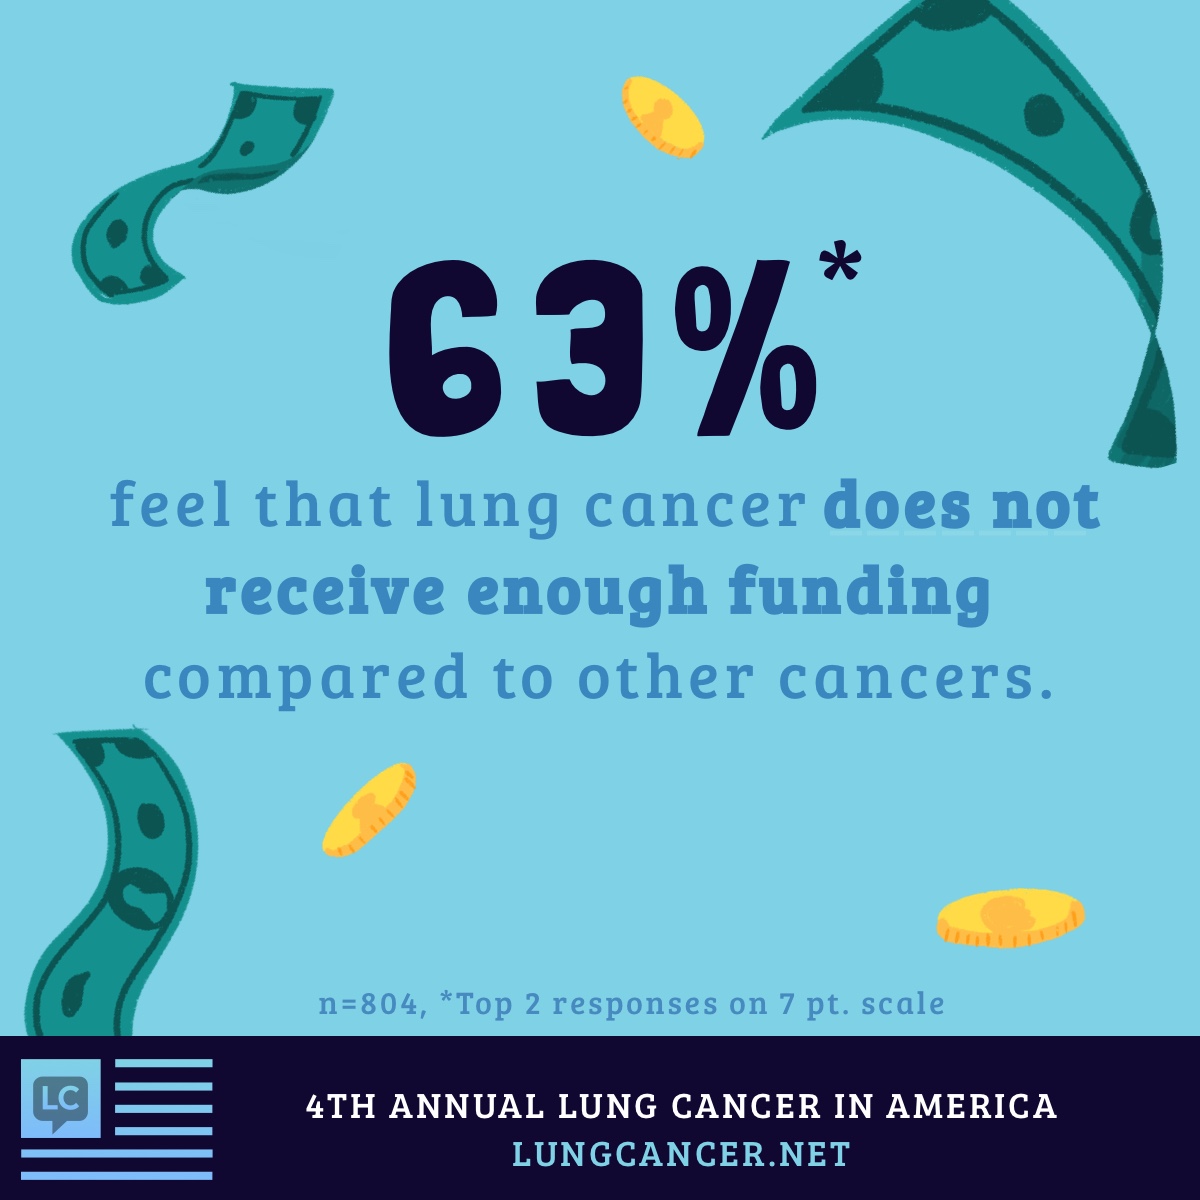 63% feel that lung cancer does not receive enough funding compared to other cancers.